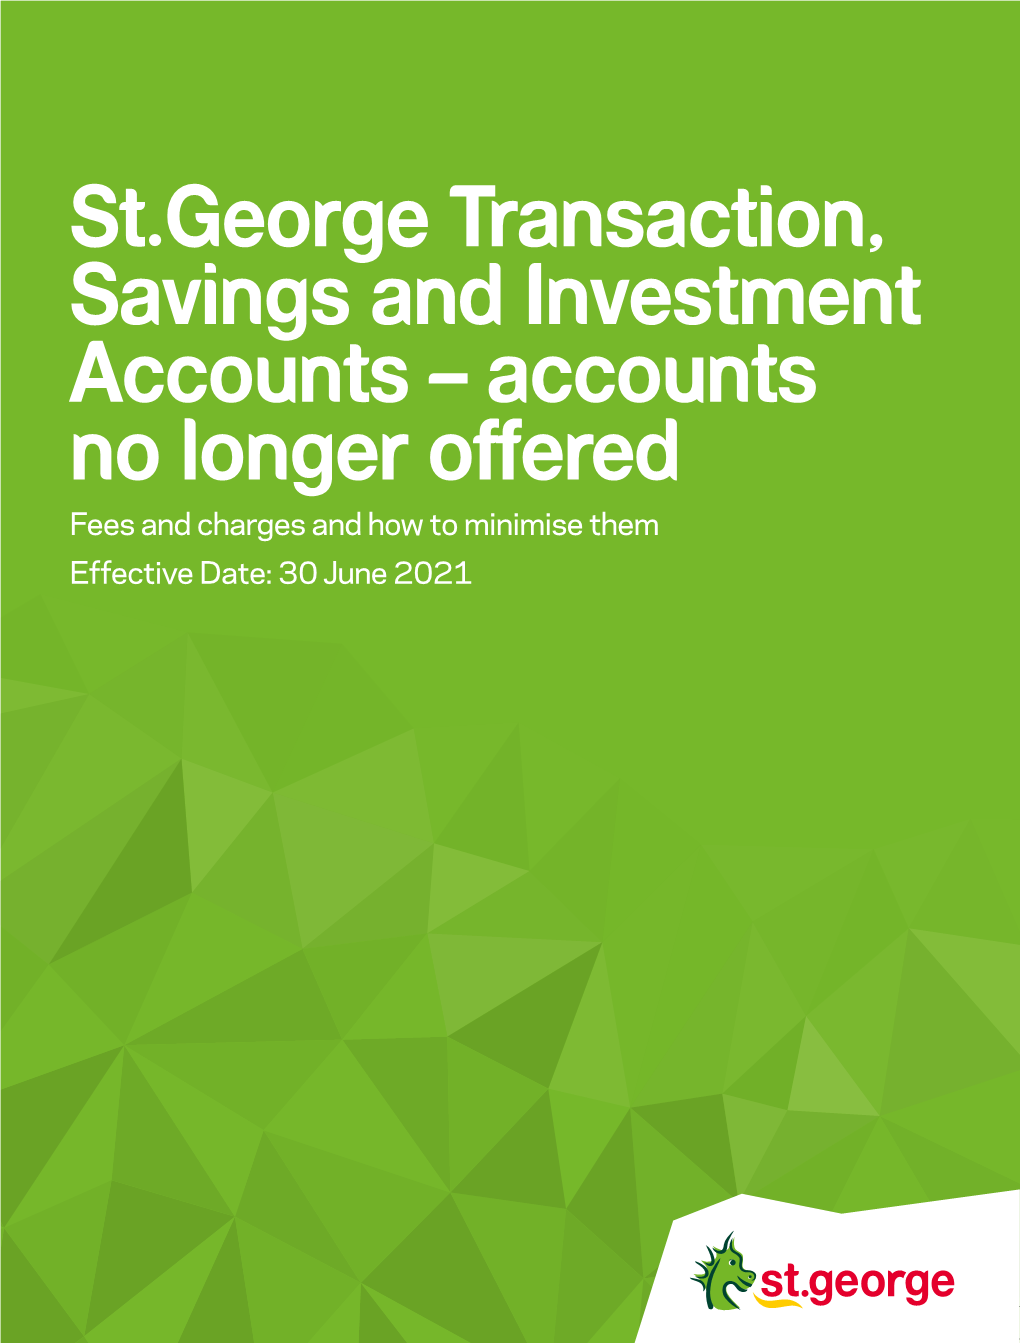 St.George Transaction, Savings and Investment Accounts – Accounts No Longer Offered Fees and Charges and How to Minimise Them Effective Date: 30 June 2021